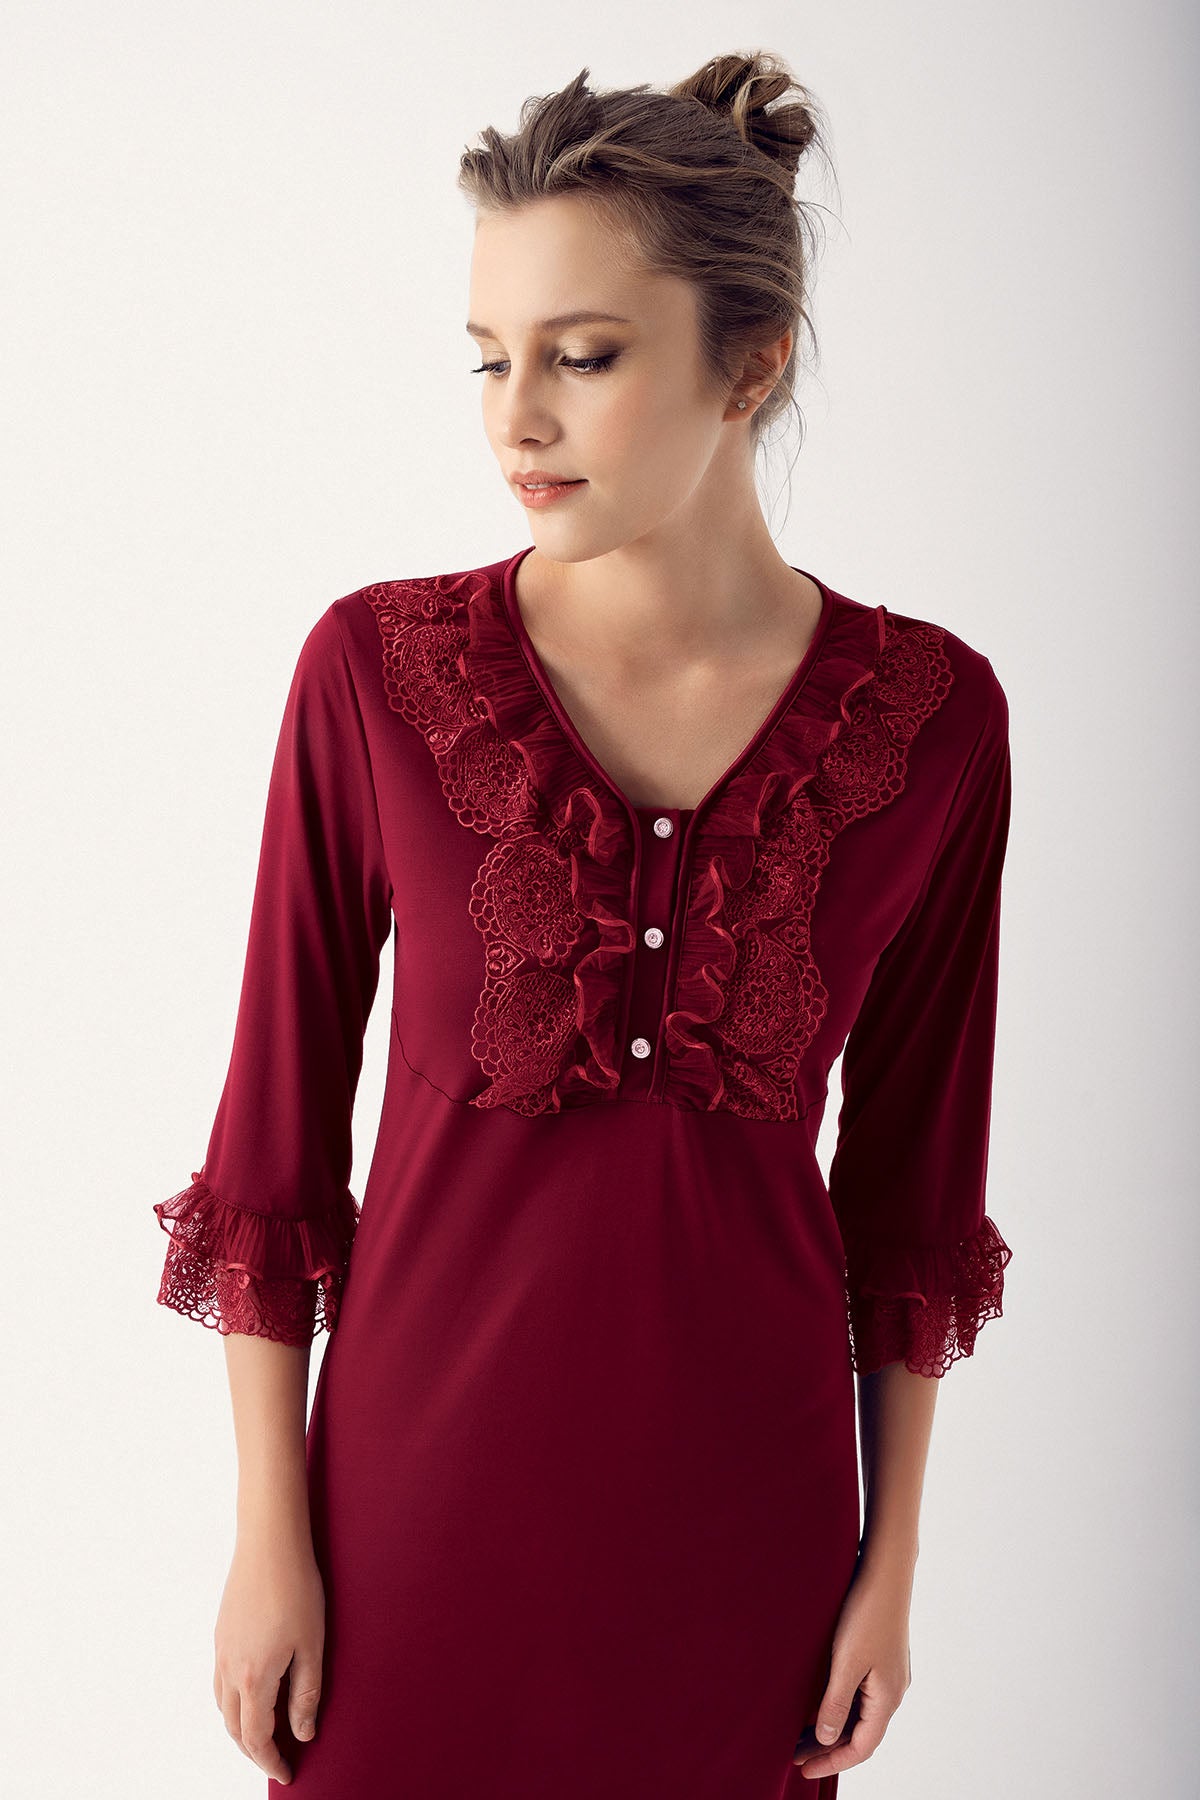 Shopymommy 14403 Leaf Lace Maternity & Nursing Nightgown With Robe Claret Red